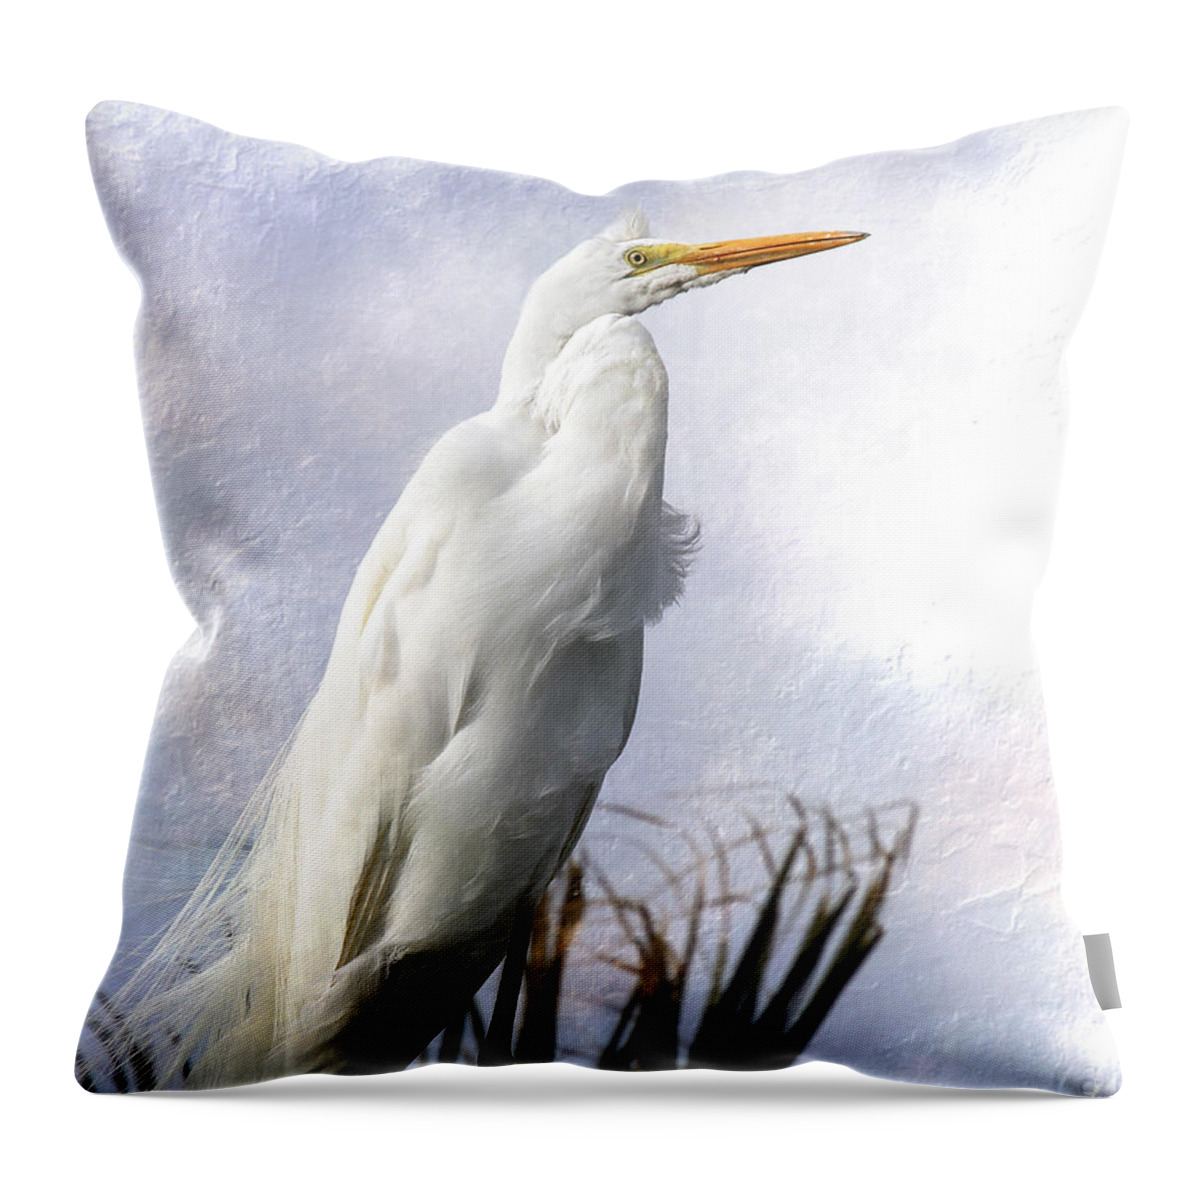 Exotic Throw Pillow featuring the digital art Snowy Egret by Michele A Loftus